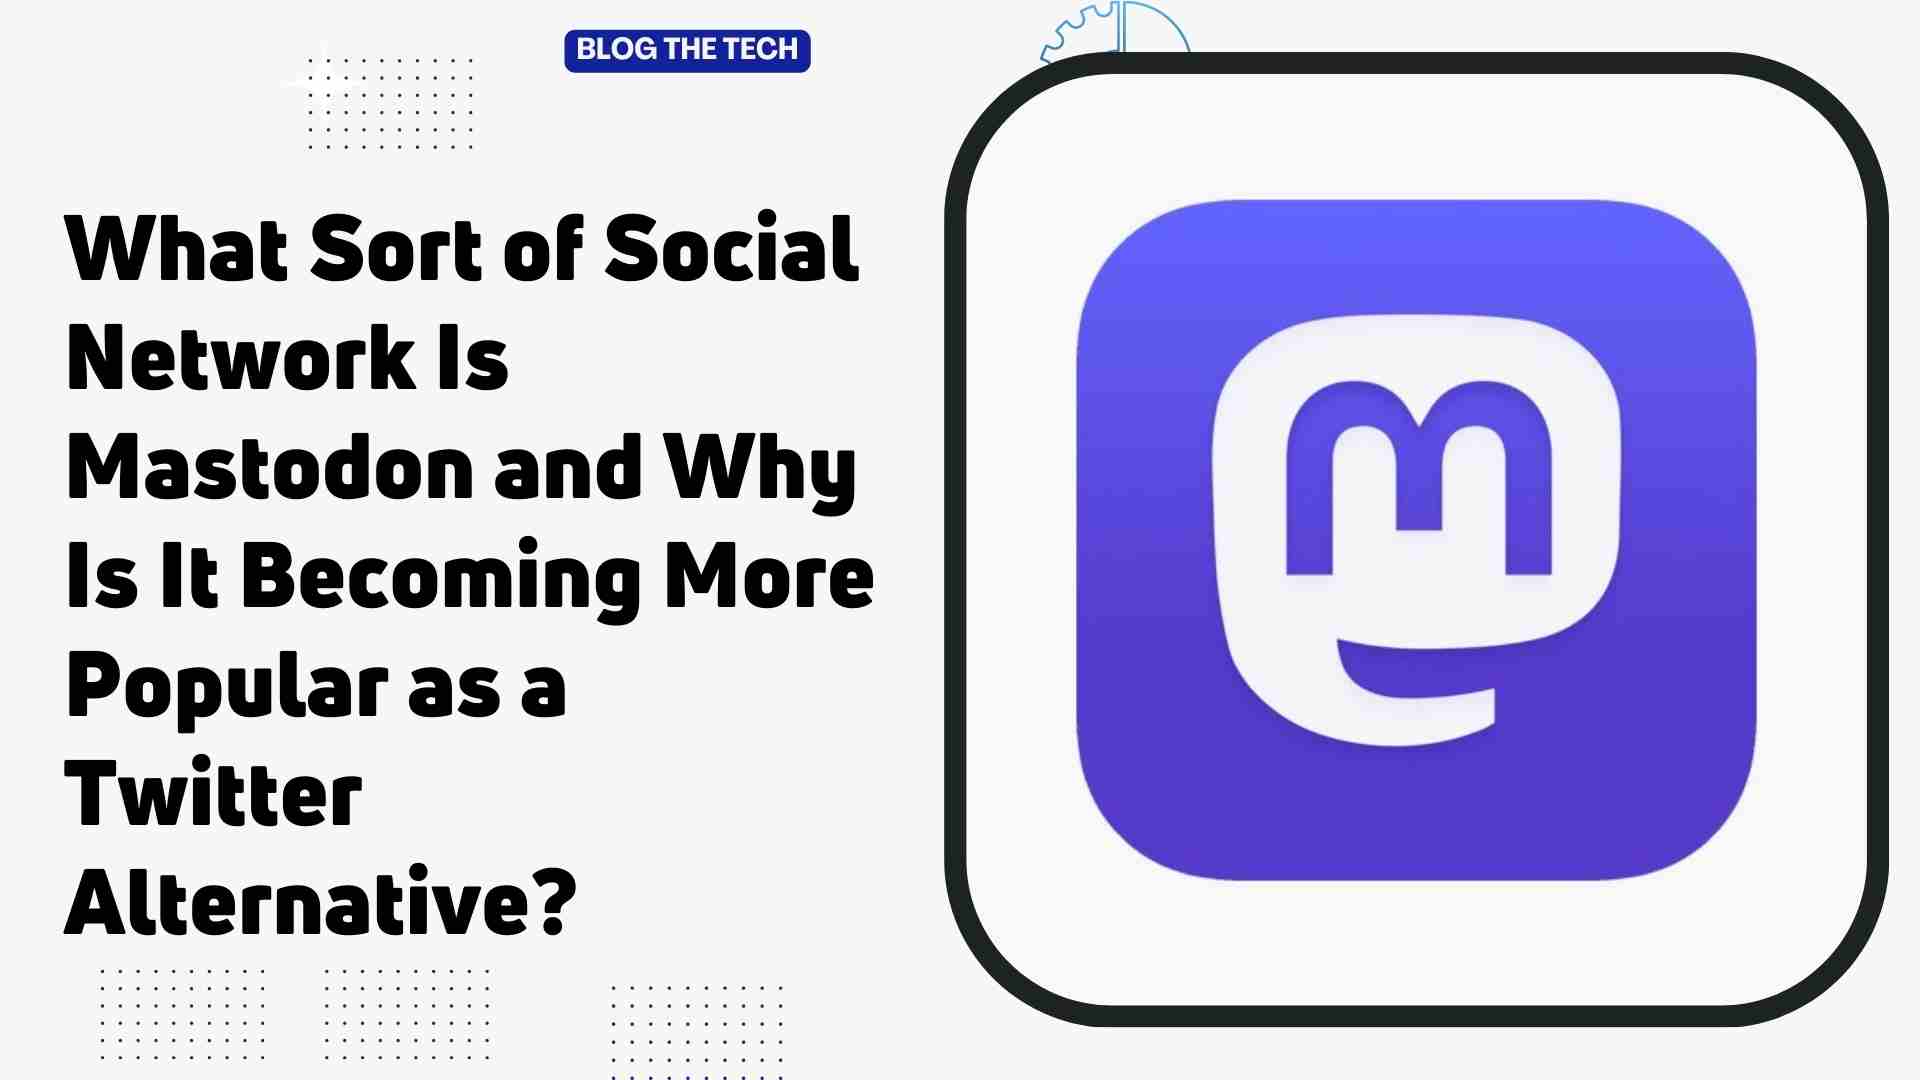 What Sort of Social Network Is Mastodon and Why Is It Becoming More Popular as a Twitter Alternative?